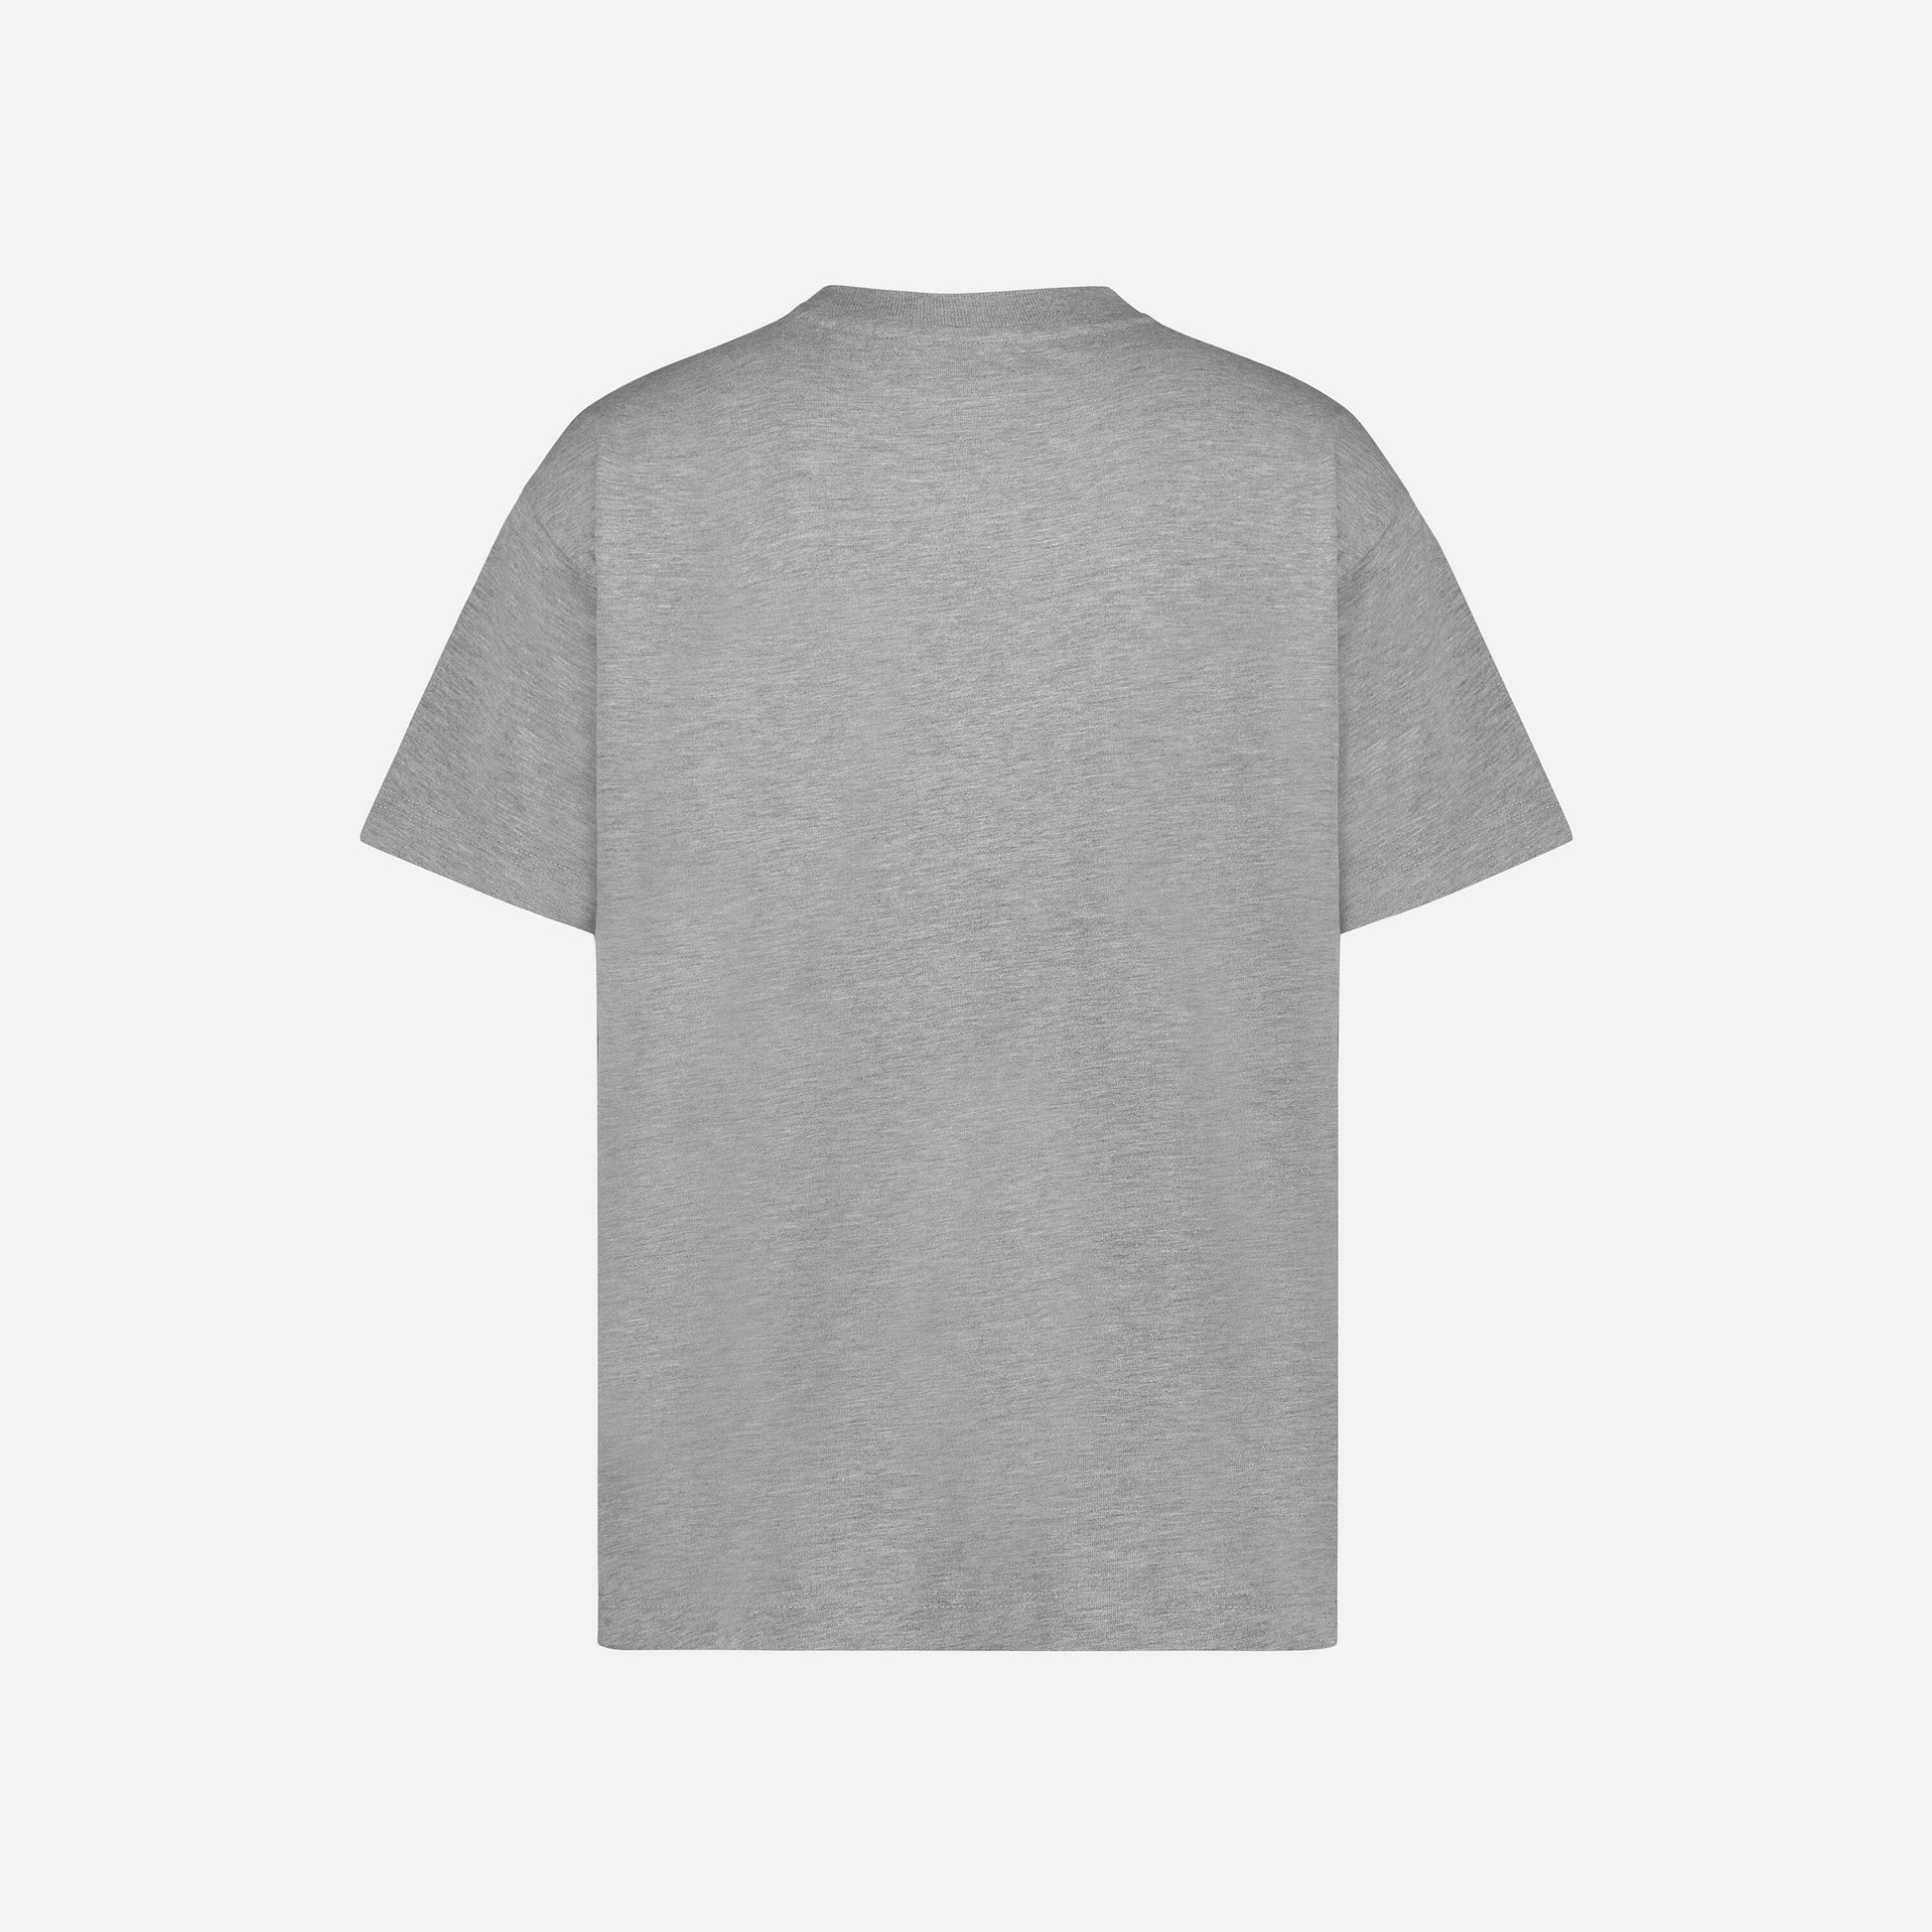 'Flaneur' Signature T-Shirt in Heather Grey